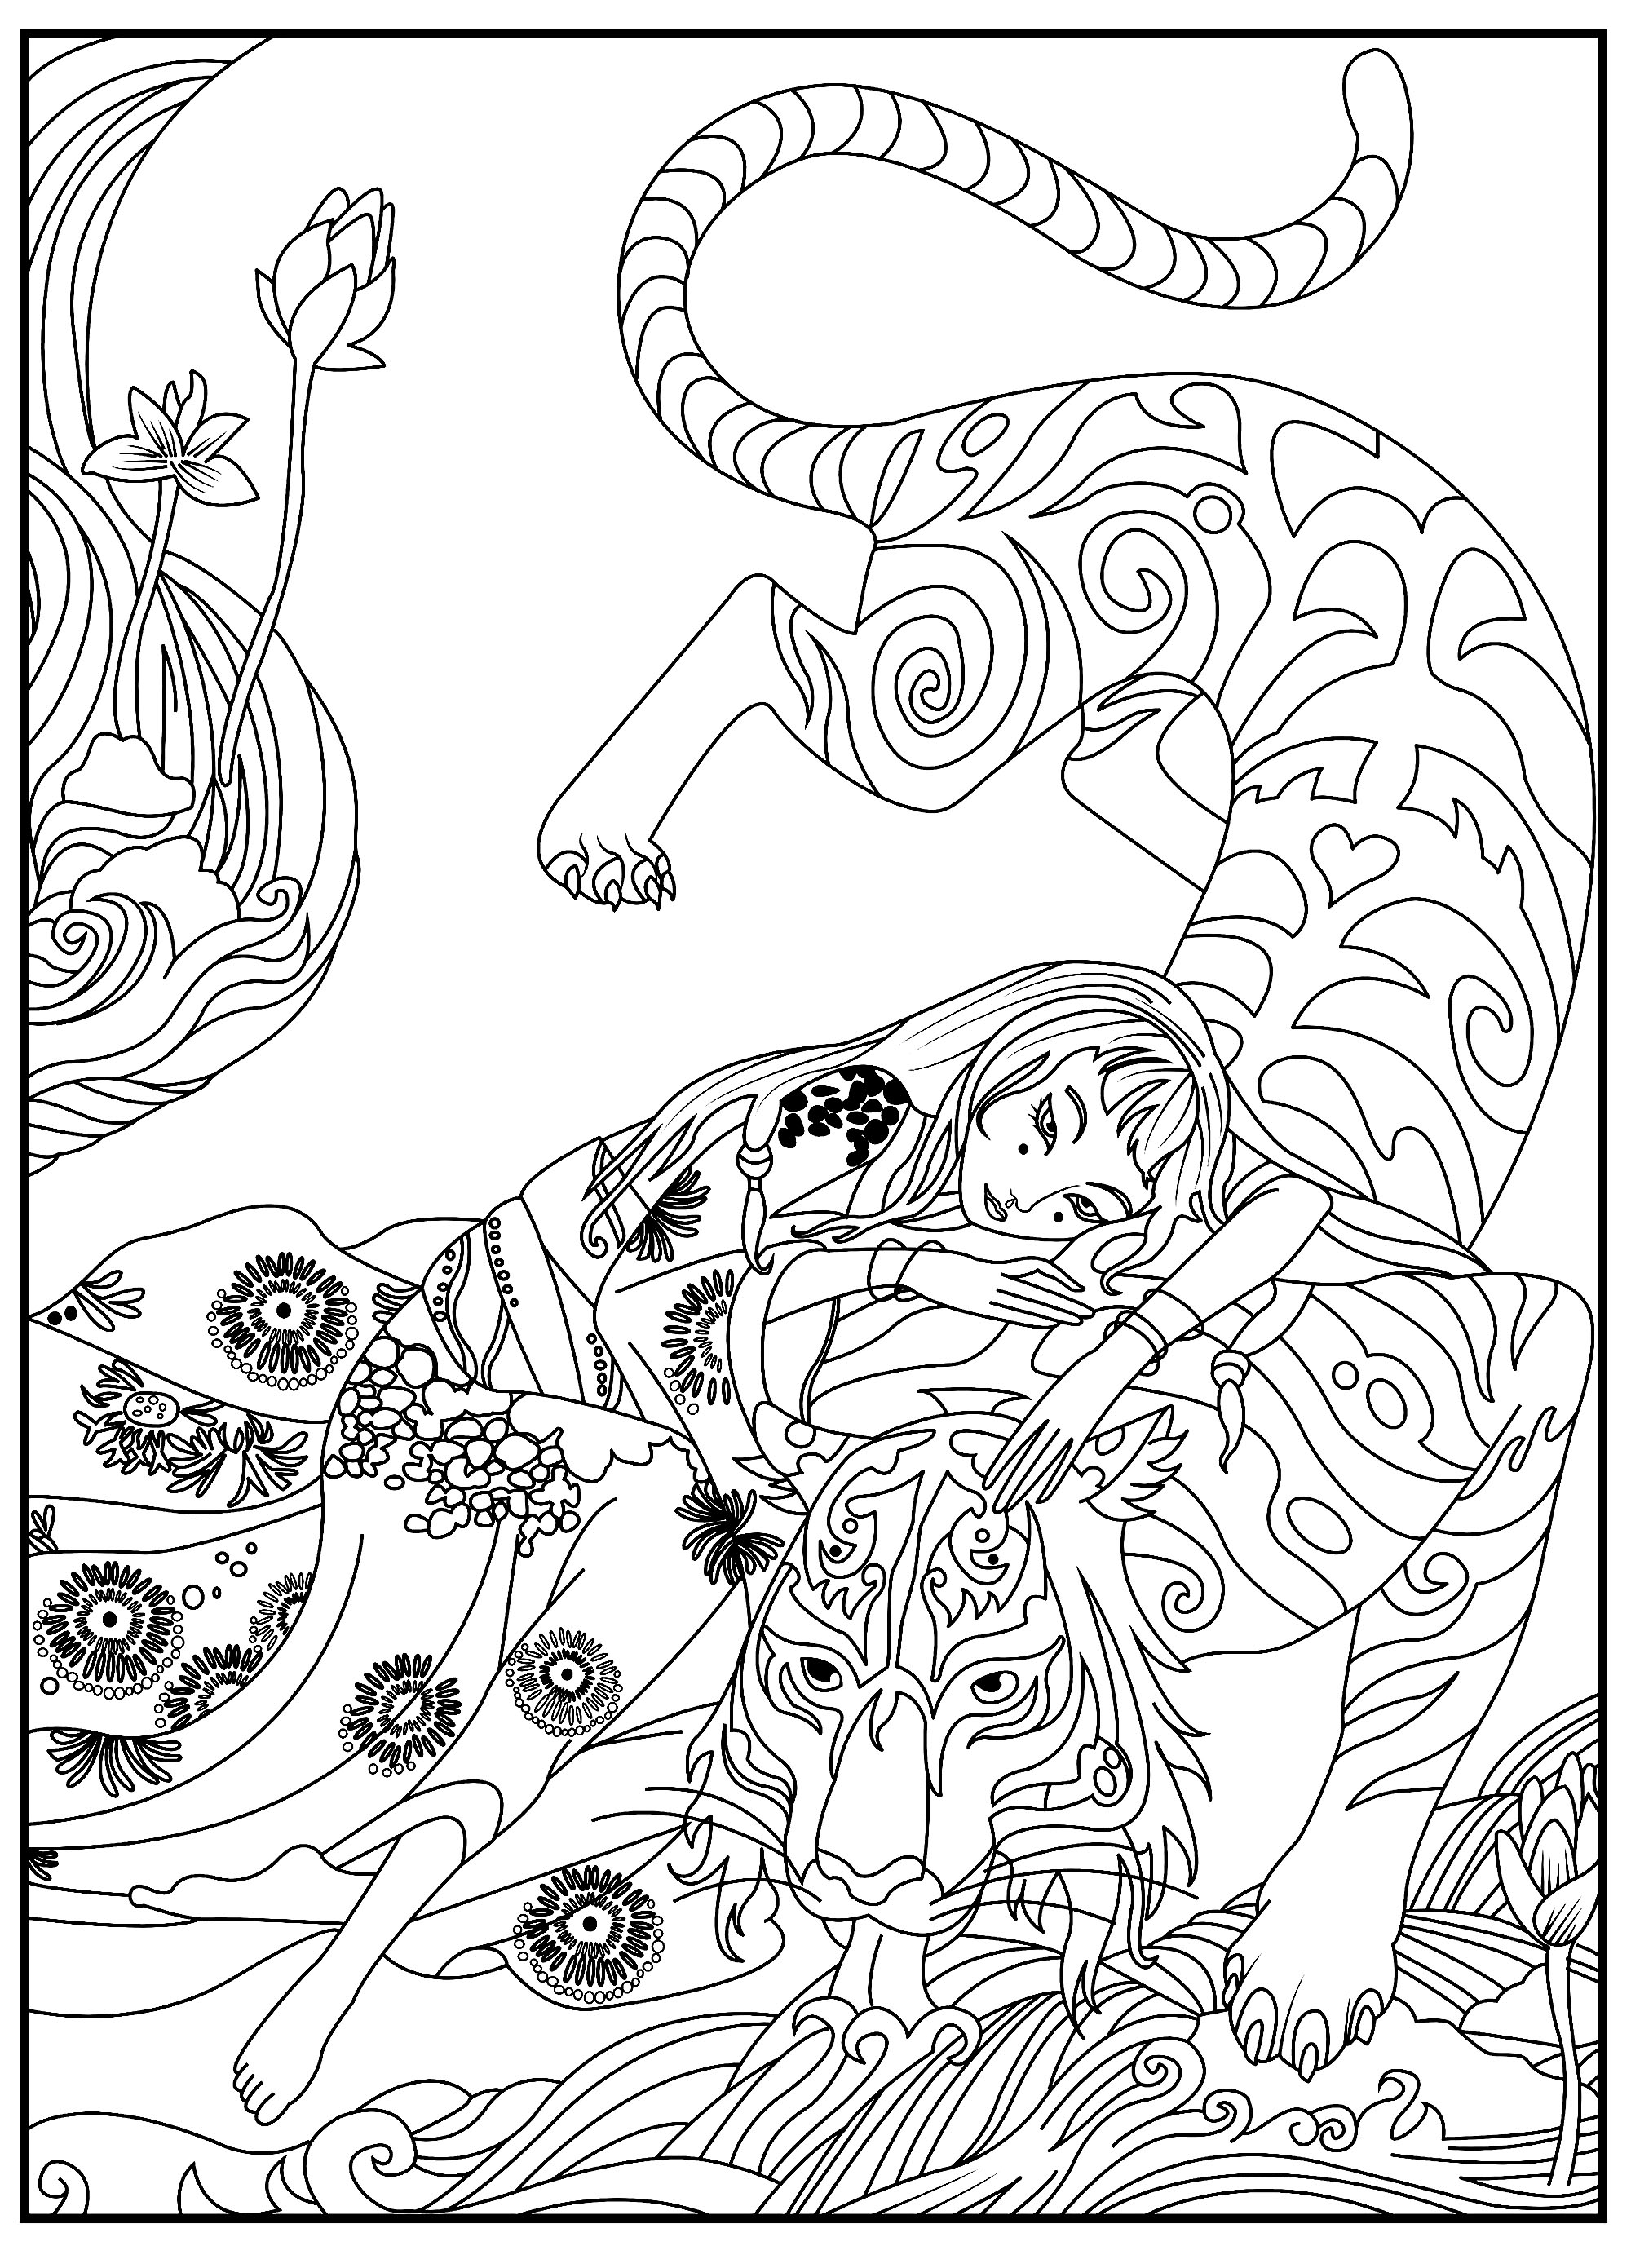 Tiger girl celine   Tigers Adult Coloring Pages